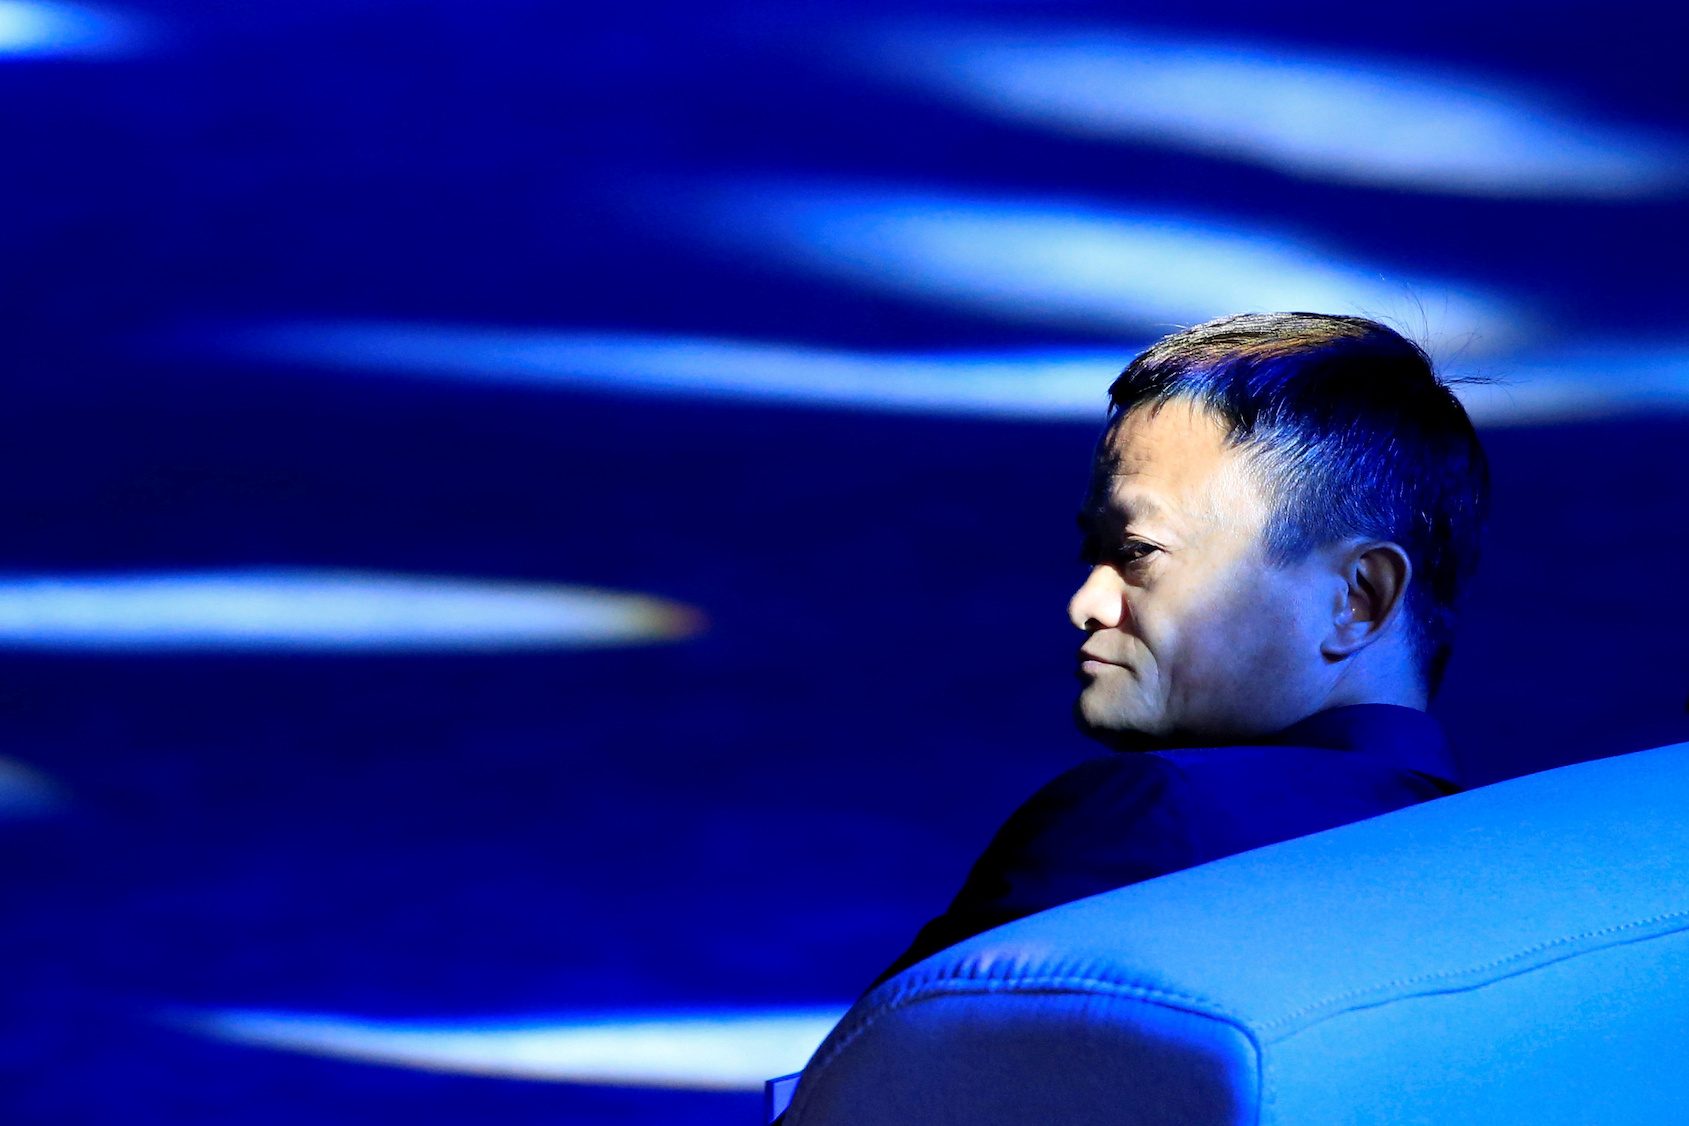 Chinese state newspaper omits Jack Ma from list of entrepreneurial leaders